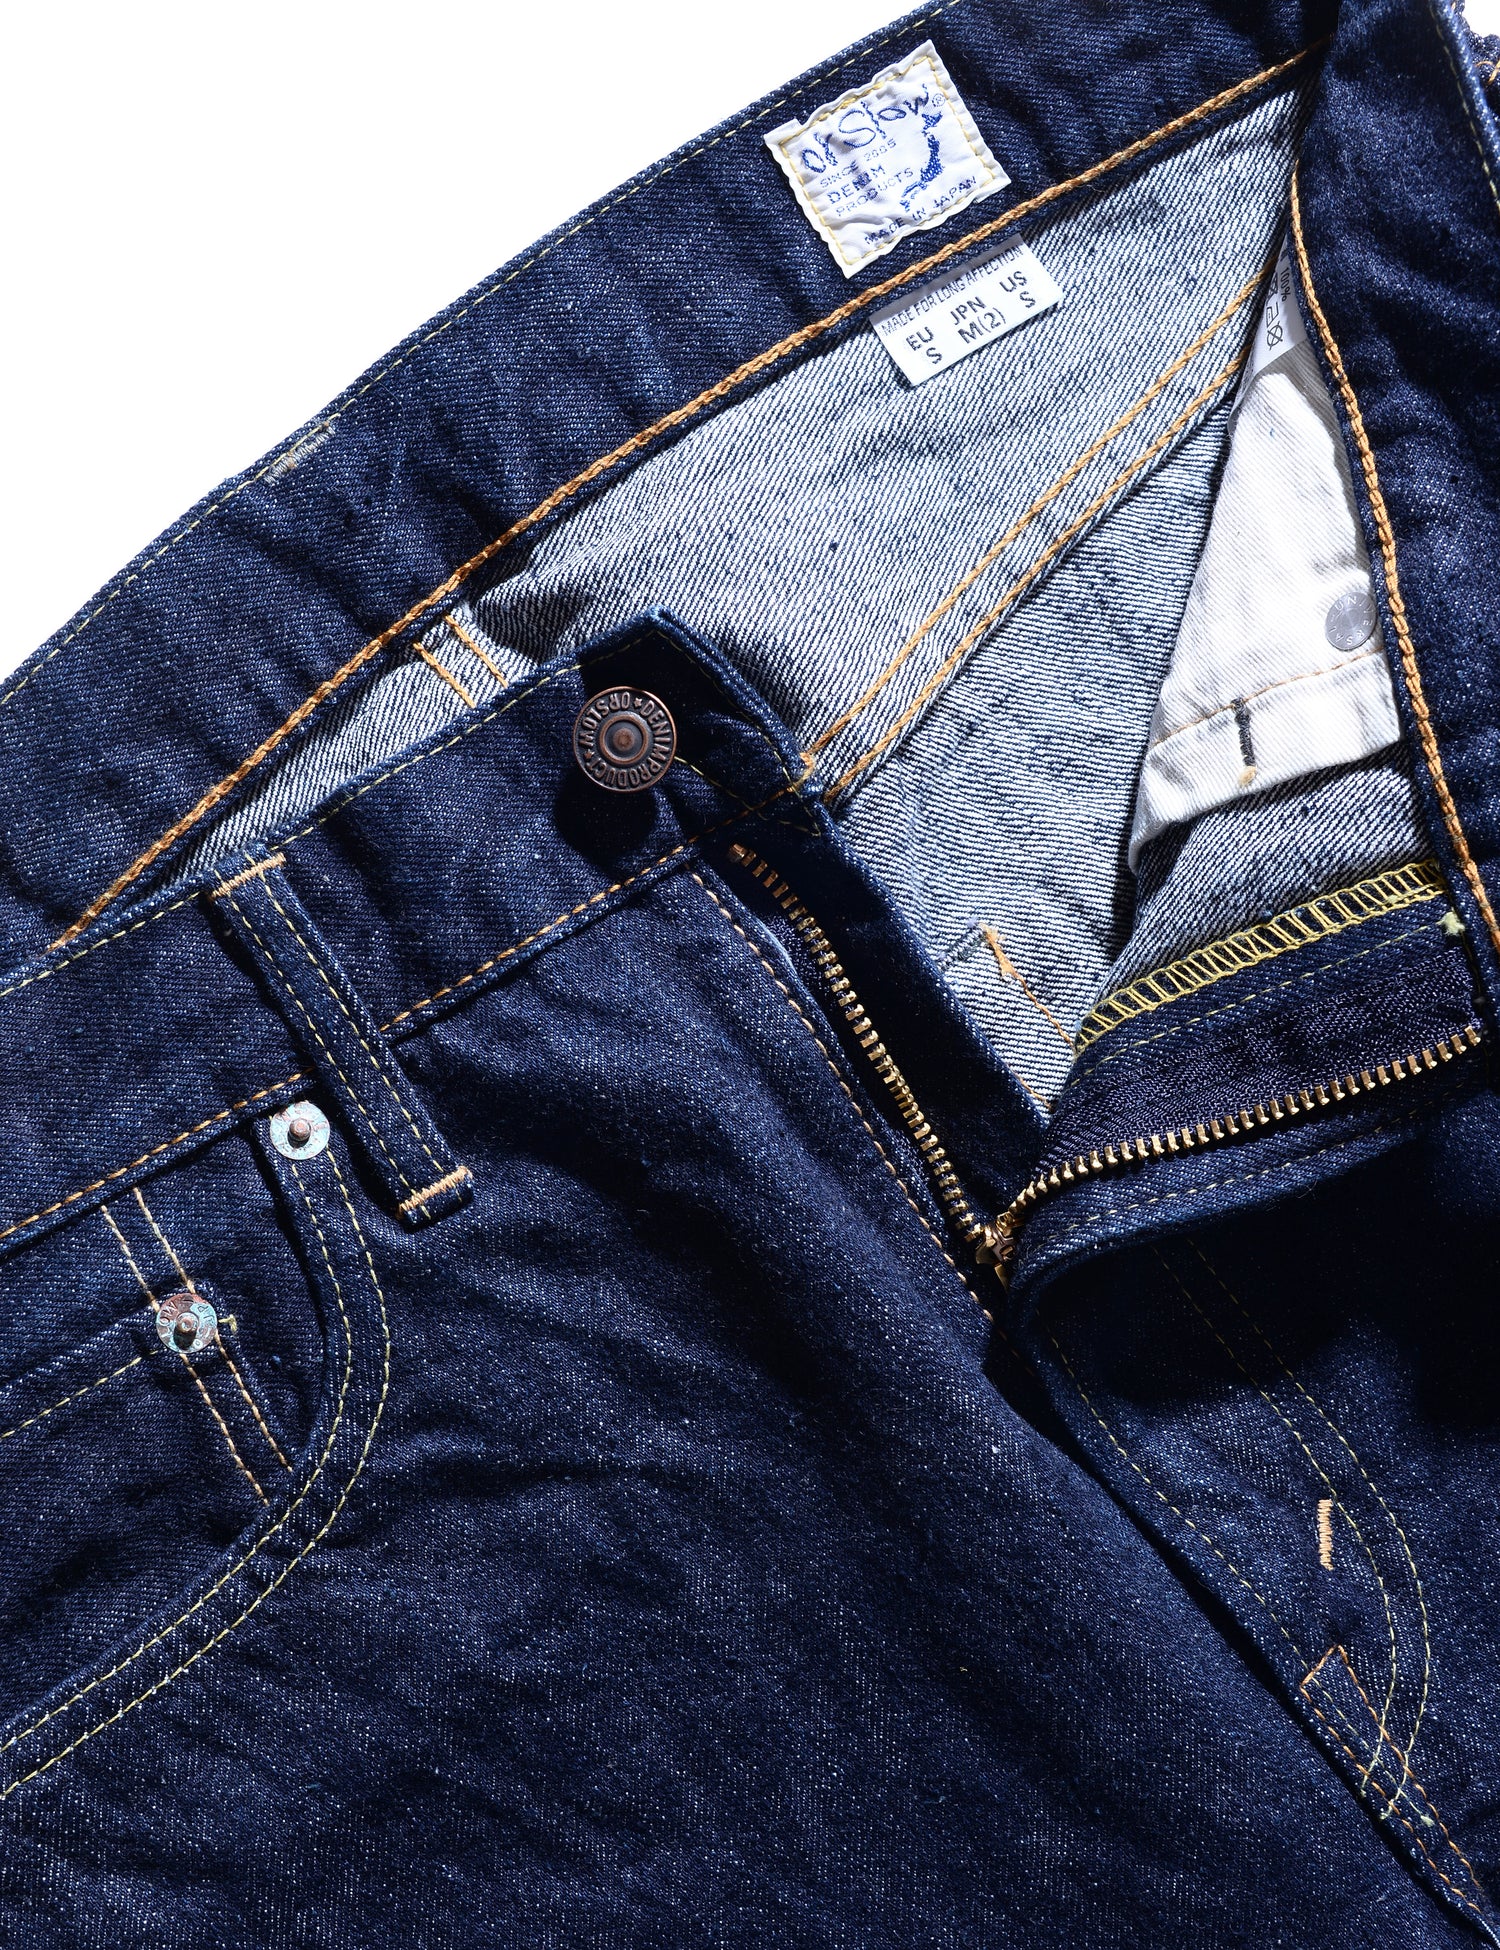 Zipper or Buttons for Denim Jeans: Which Should I Choose